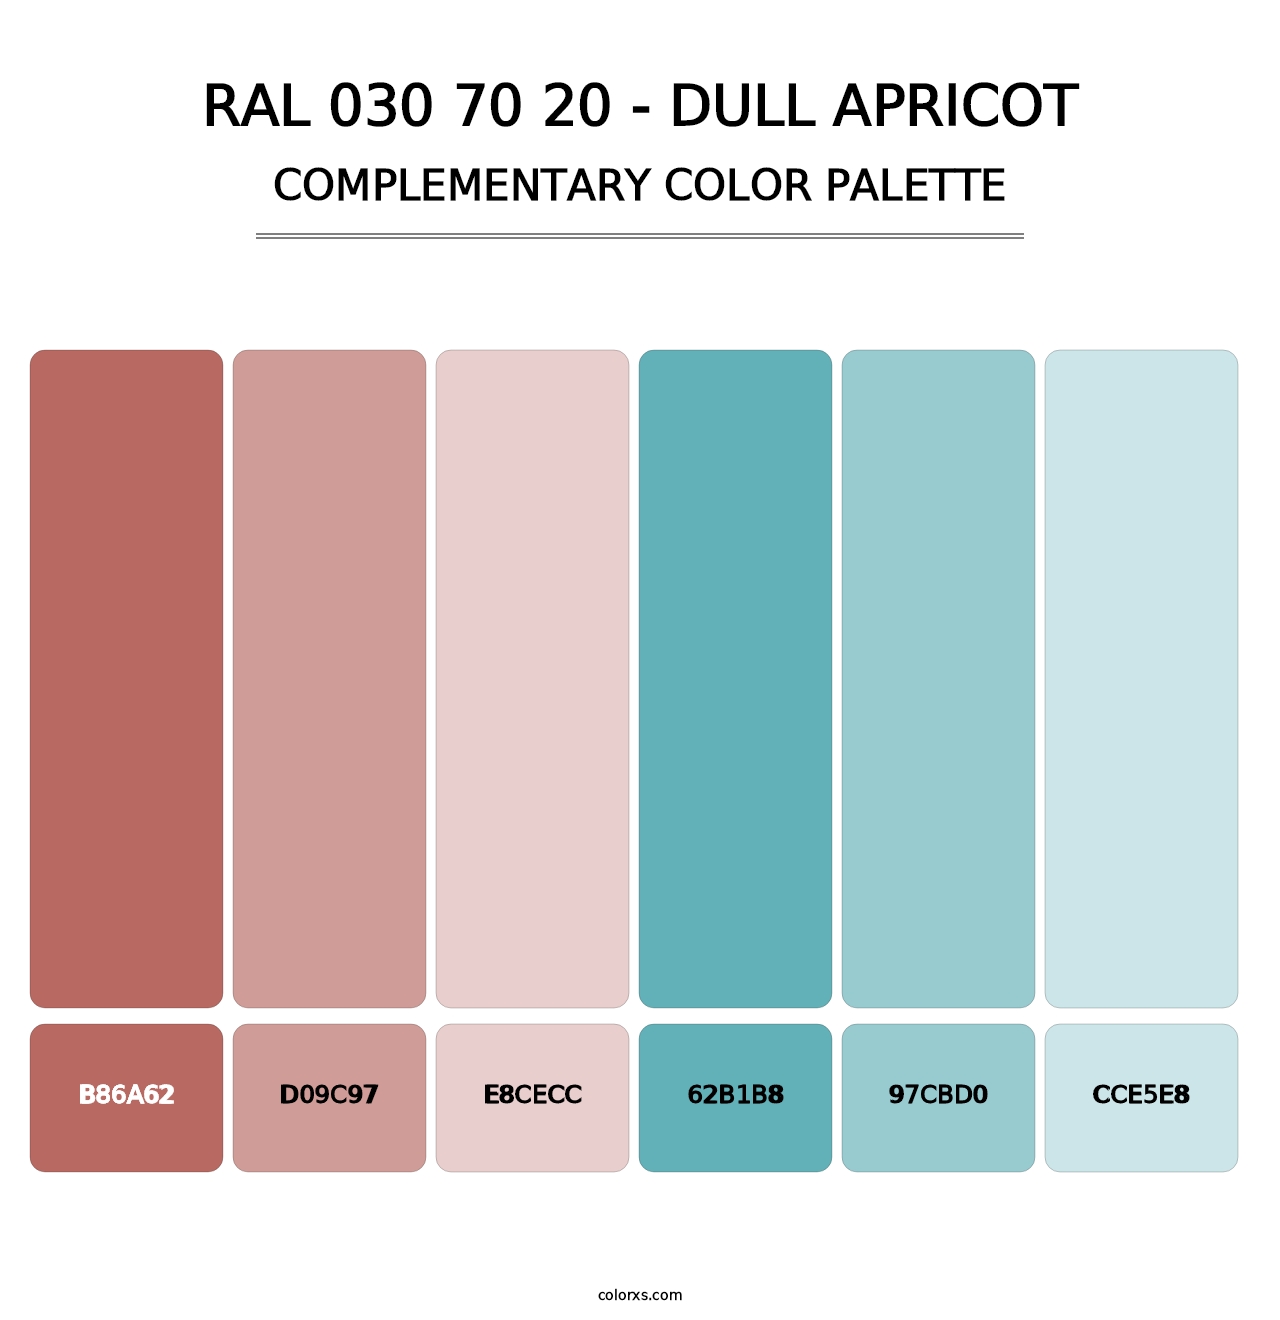 RAL 030 70 20 - Dull Apricot - Complementary Color Palette